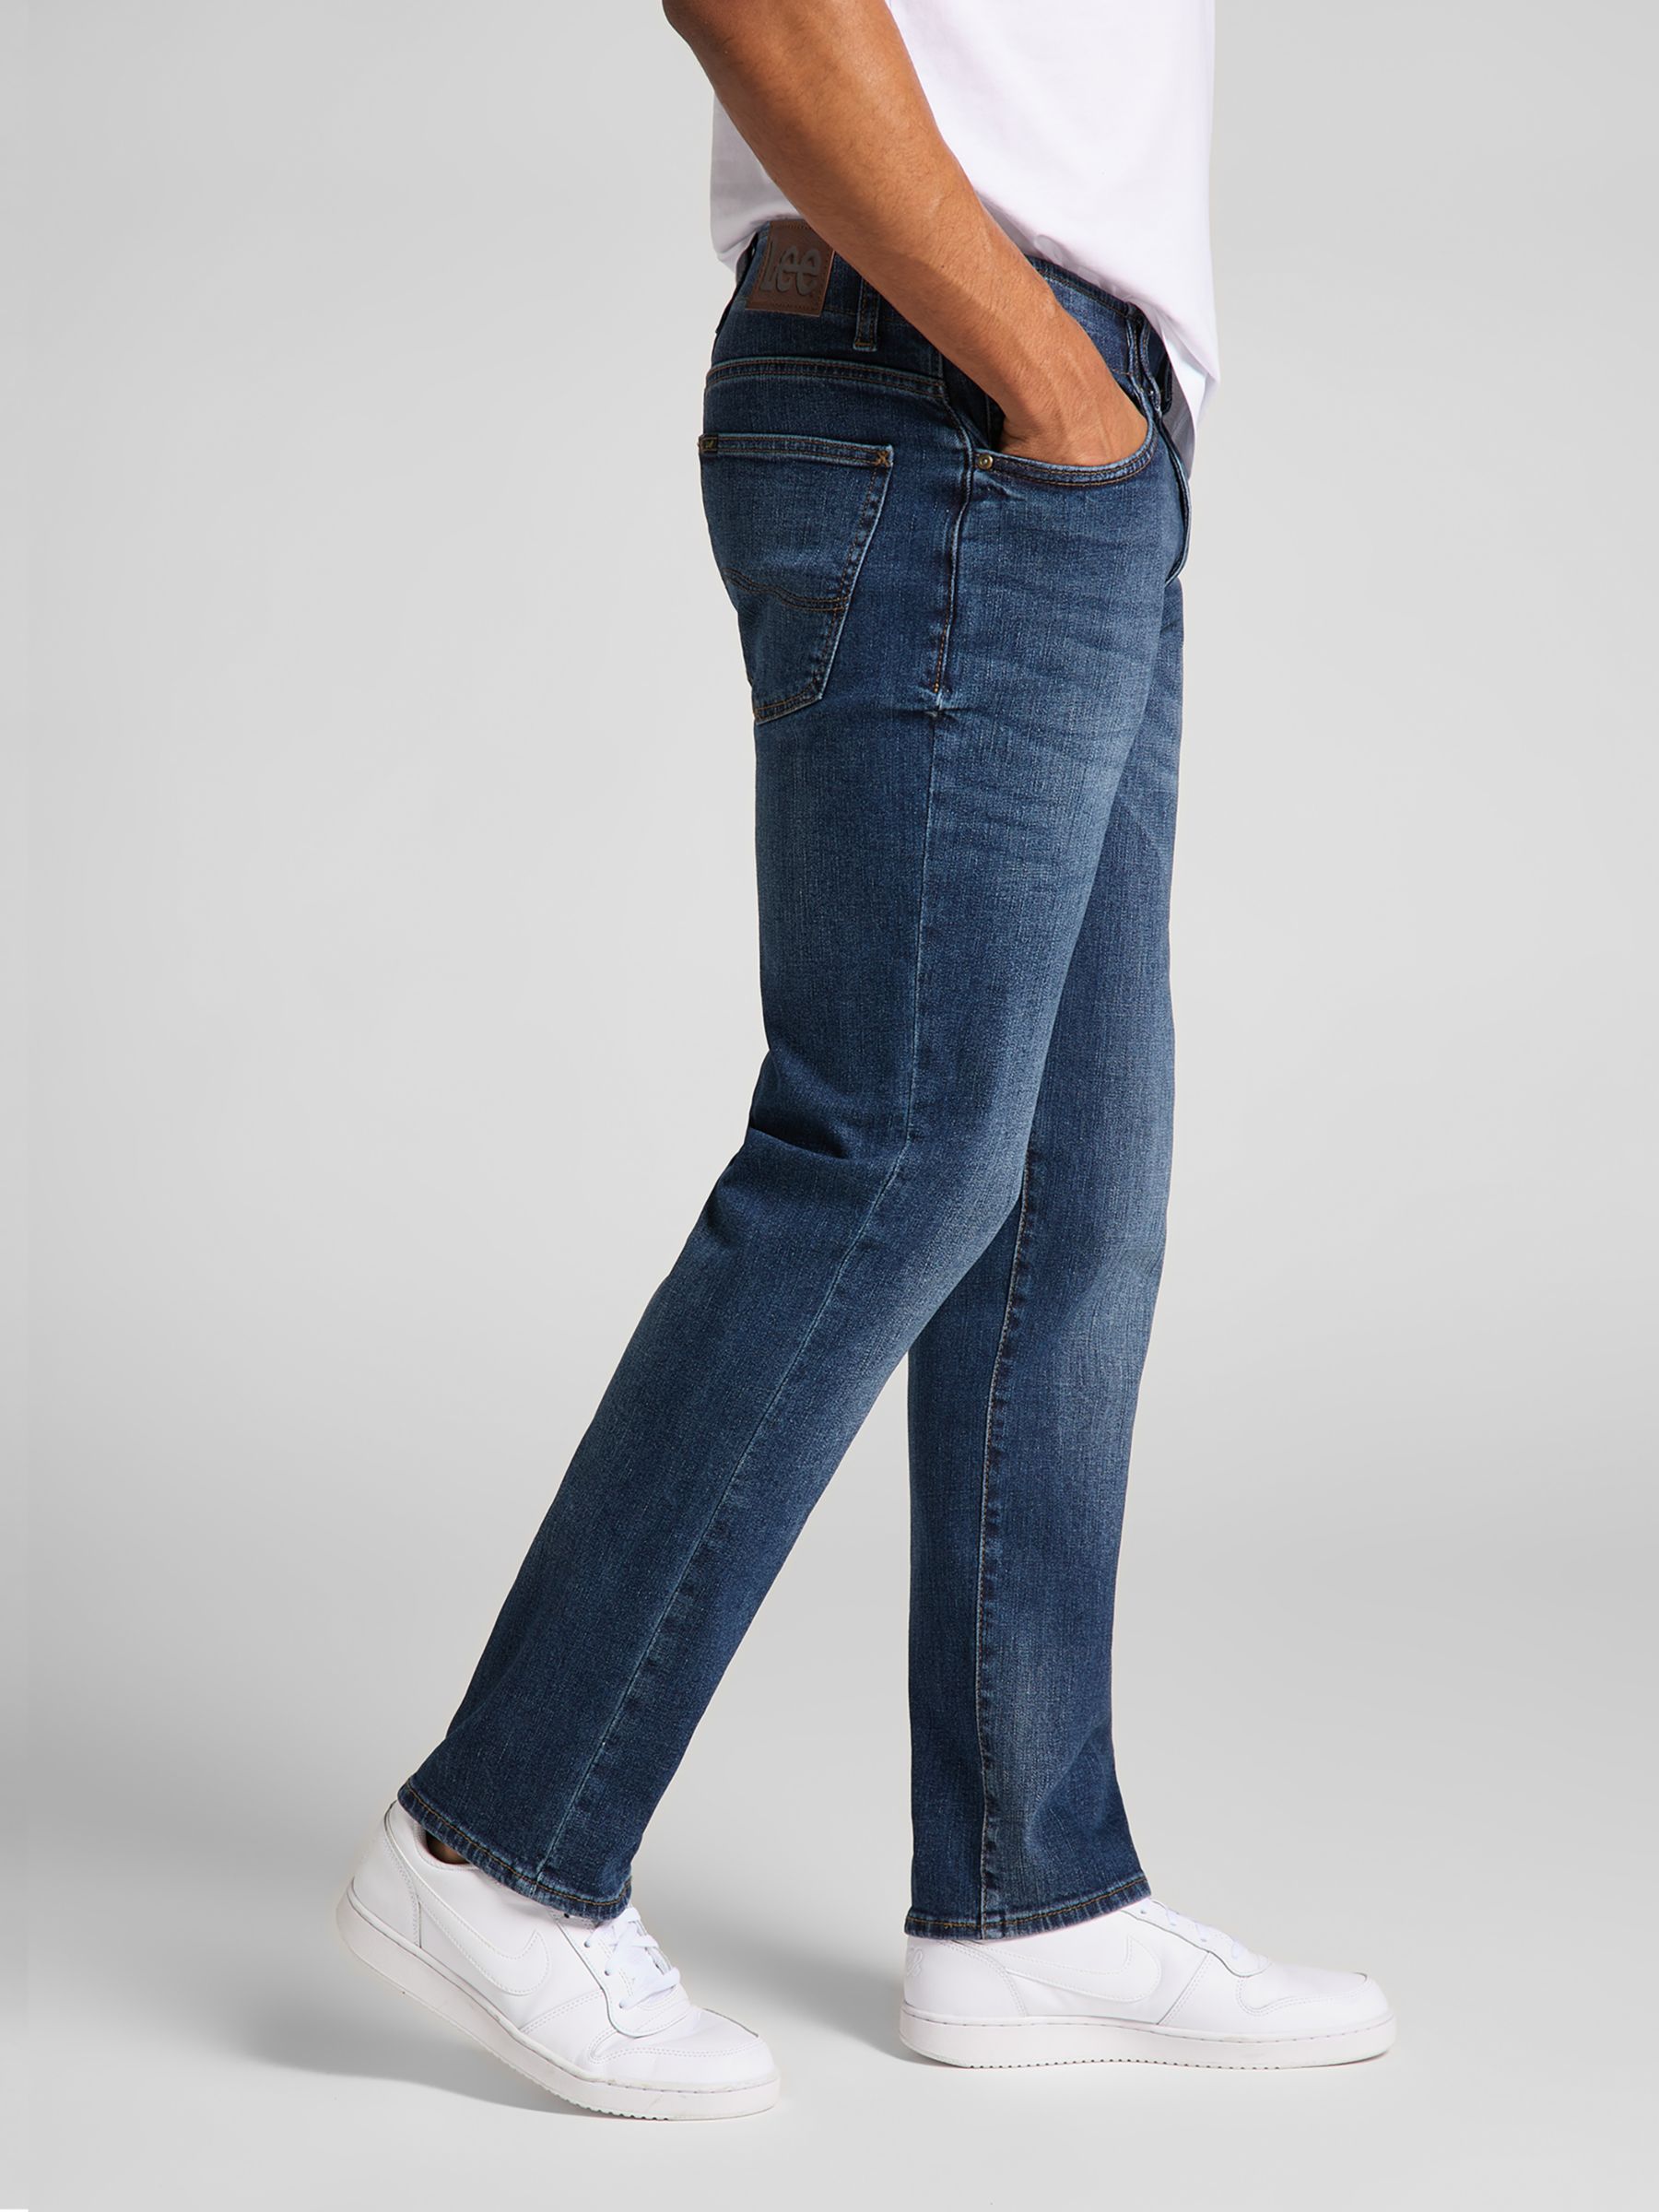 Buy Lee Maddox Straight Fit Denim Jeans, Blue Online at johnlewis.com